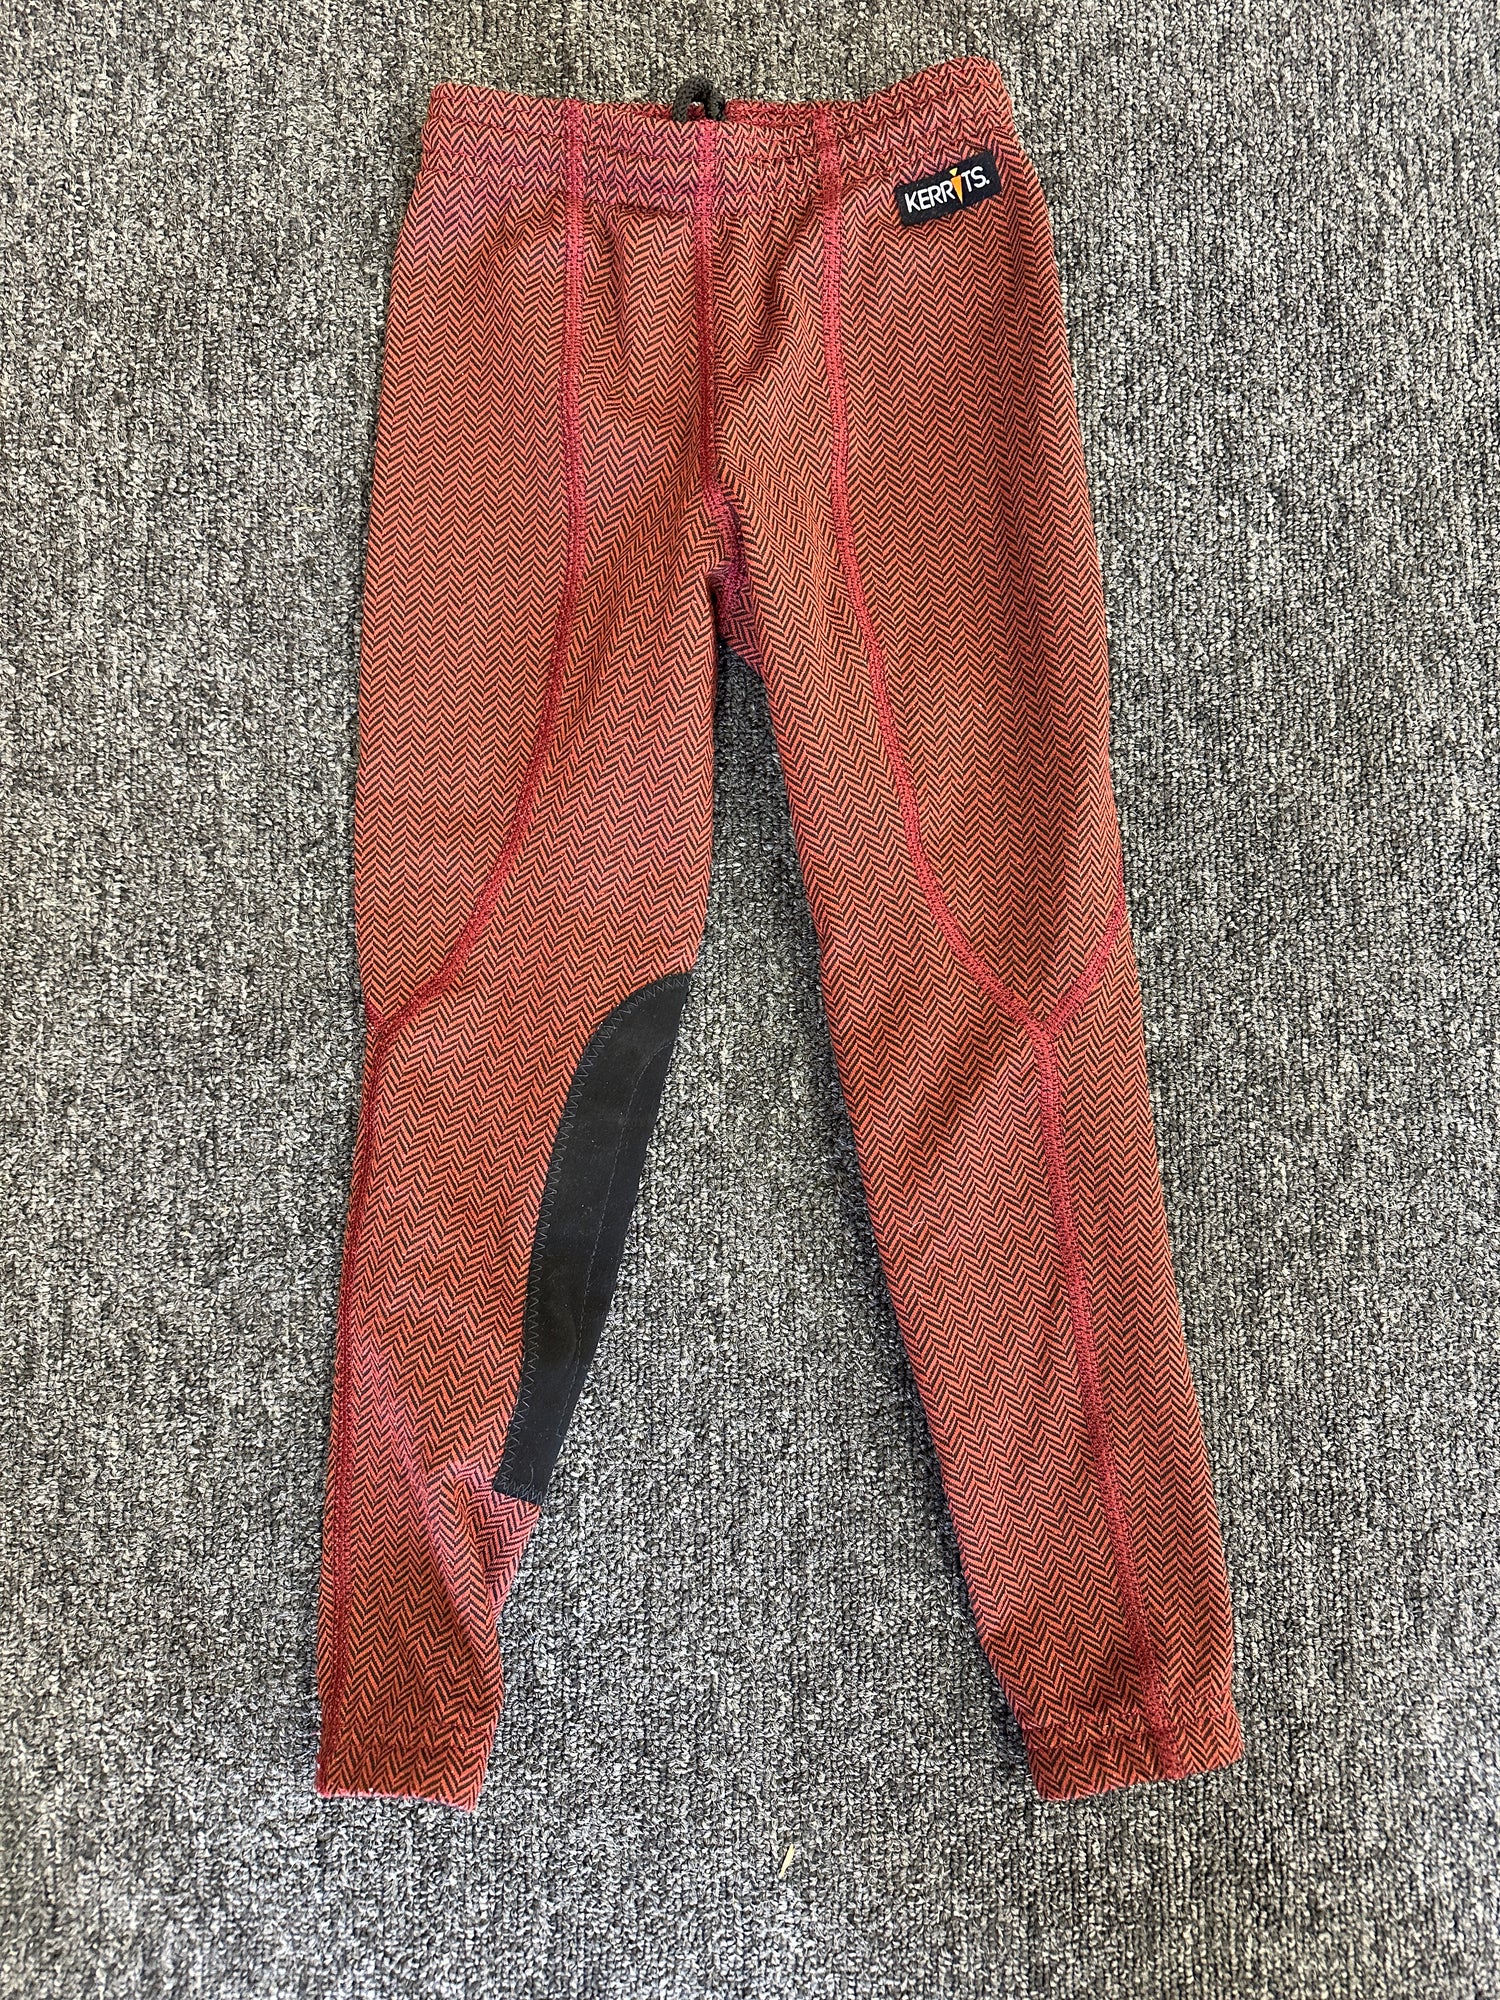 Children's Riding Breeches (Pants) Kerrit's Red and Black Size x-small